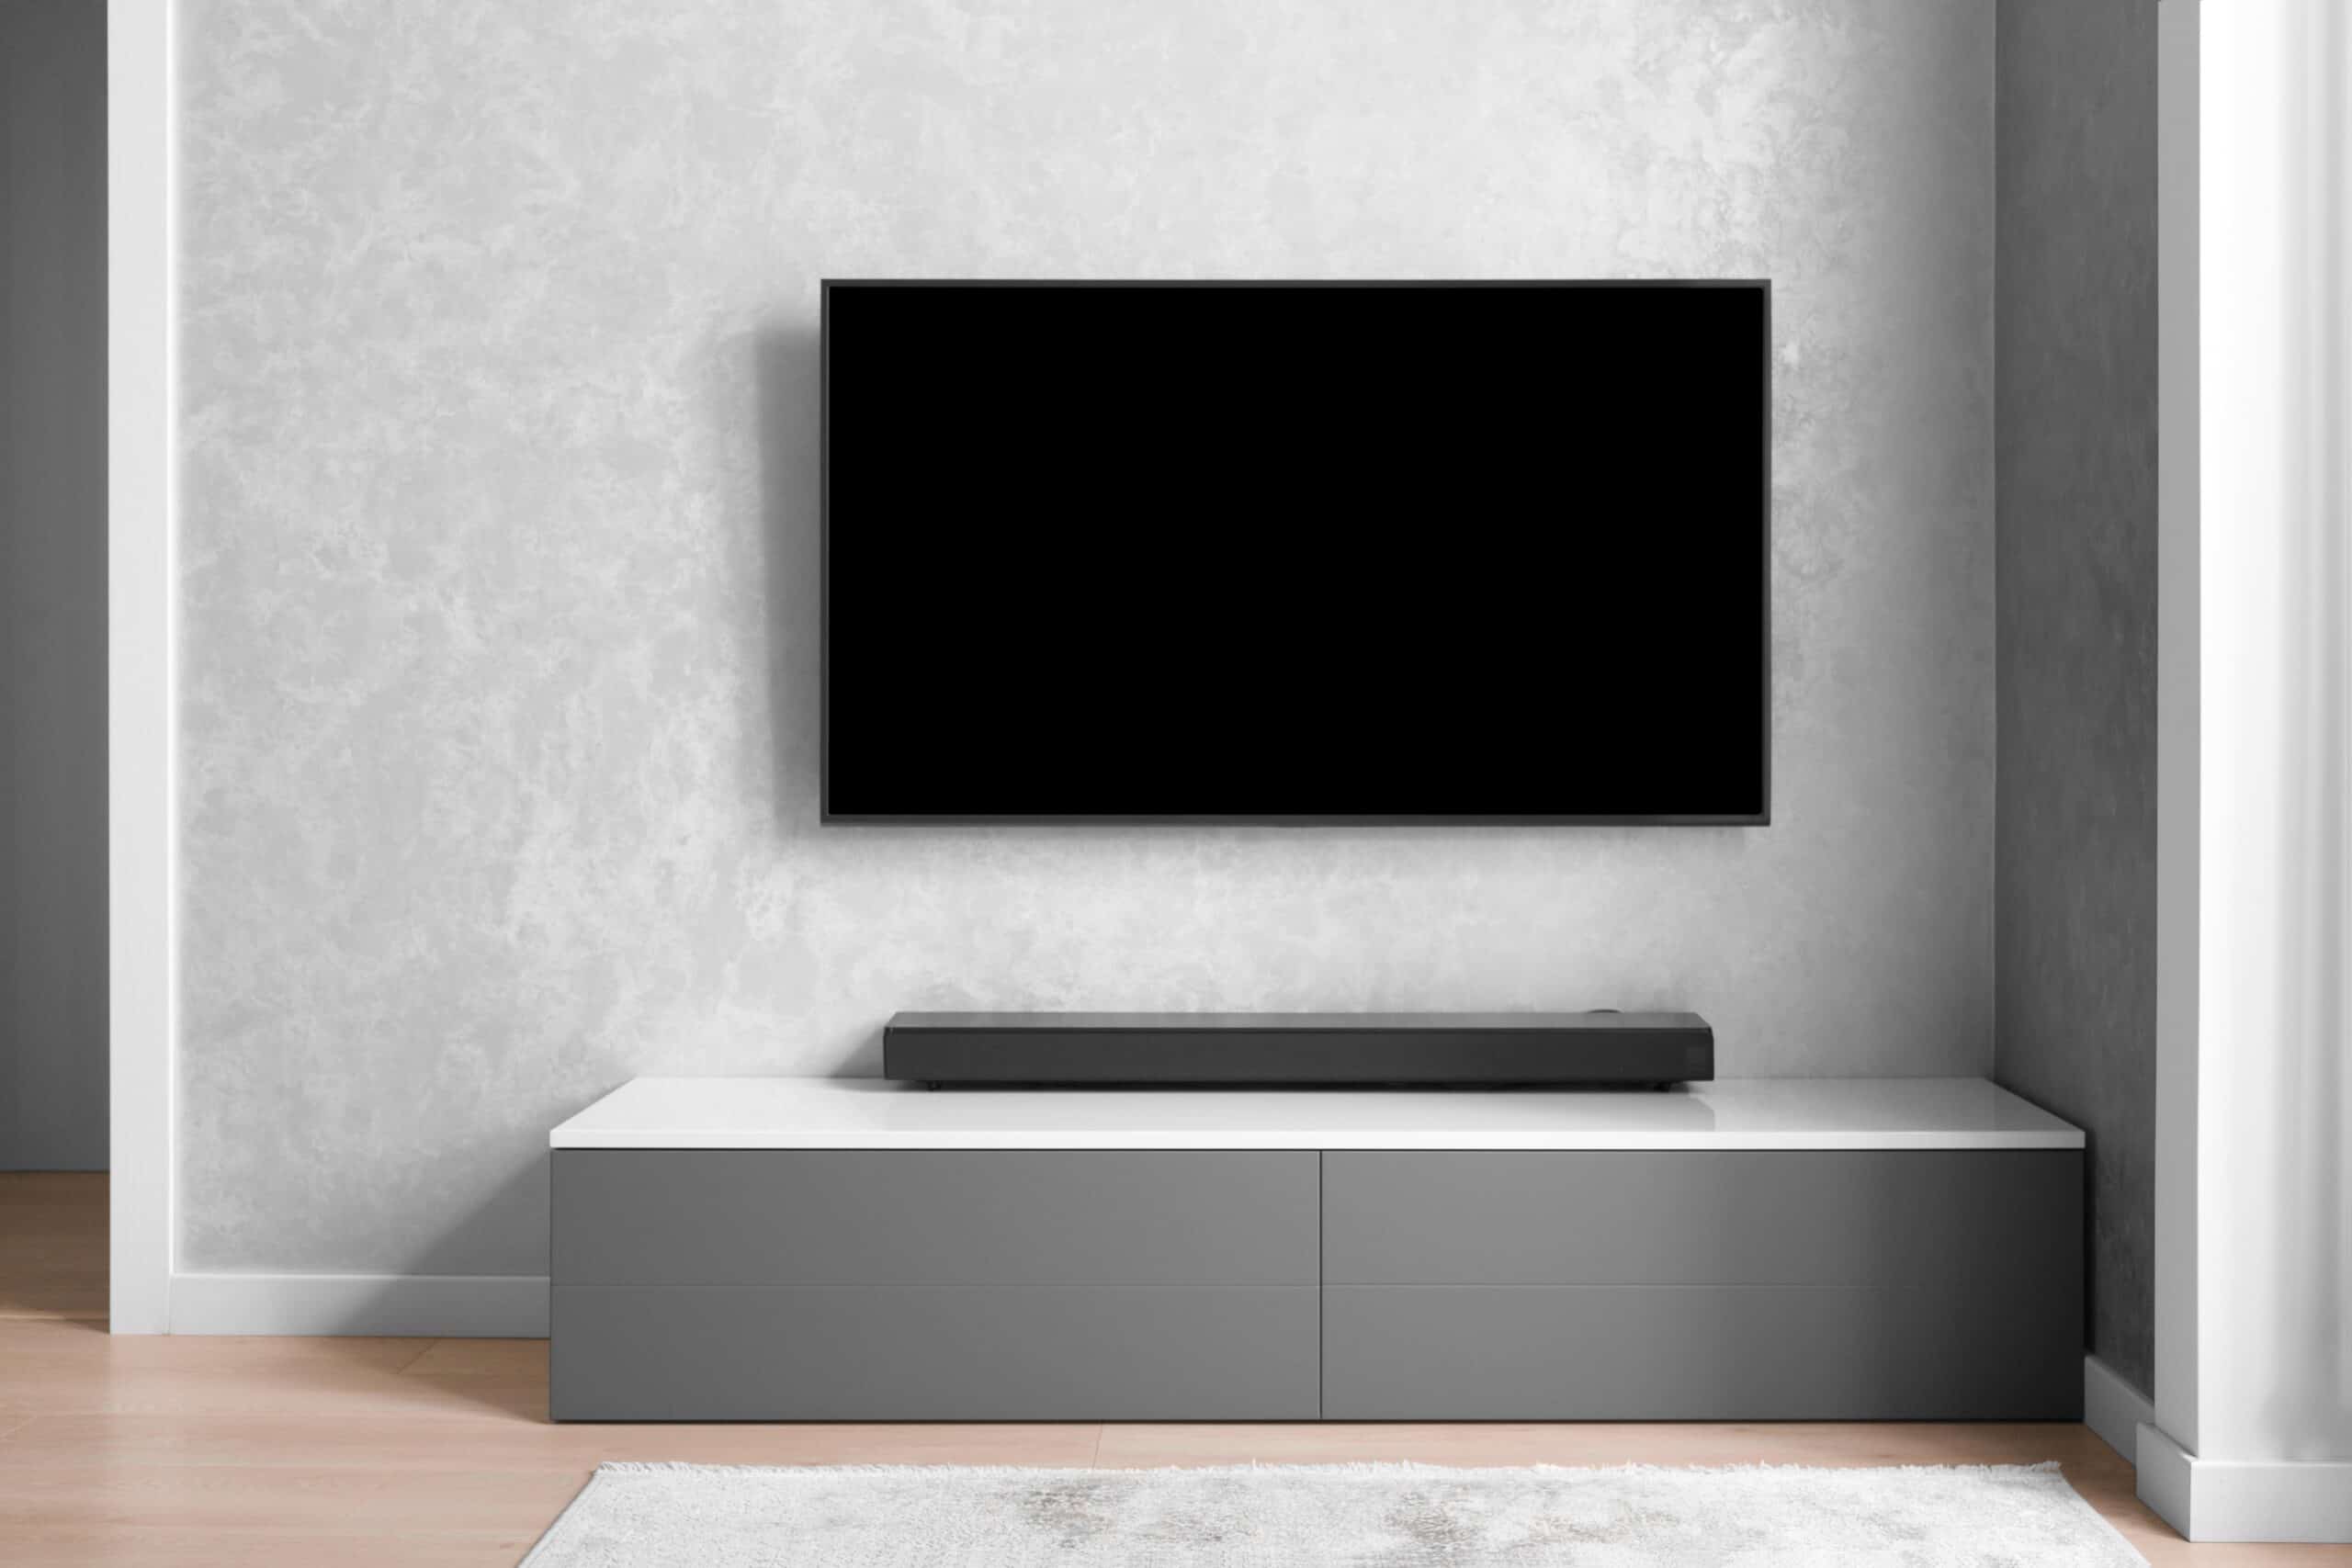 How To Connect An Onn Soundbar To A Subwoofer